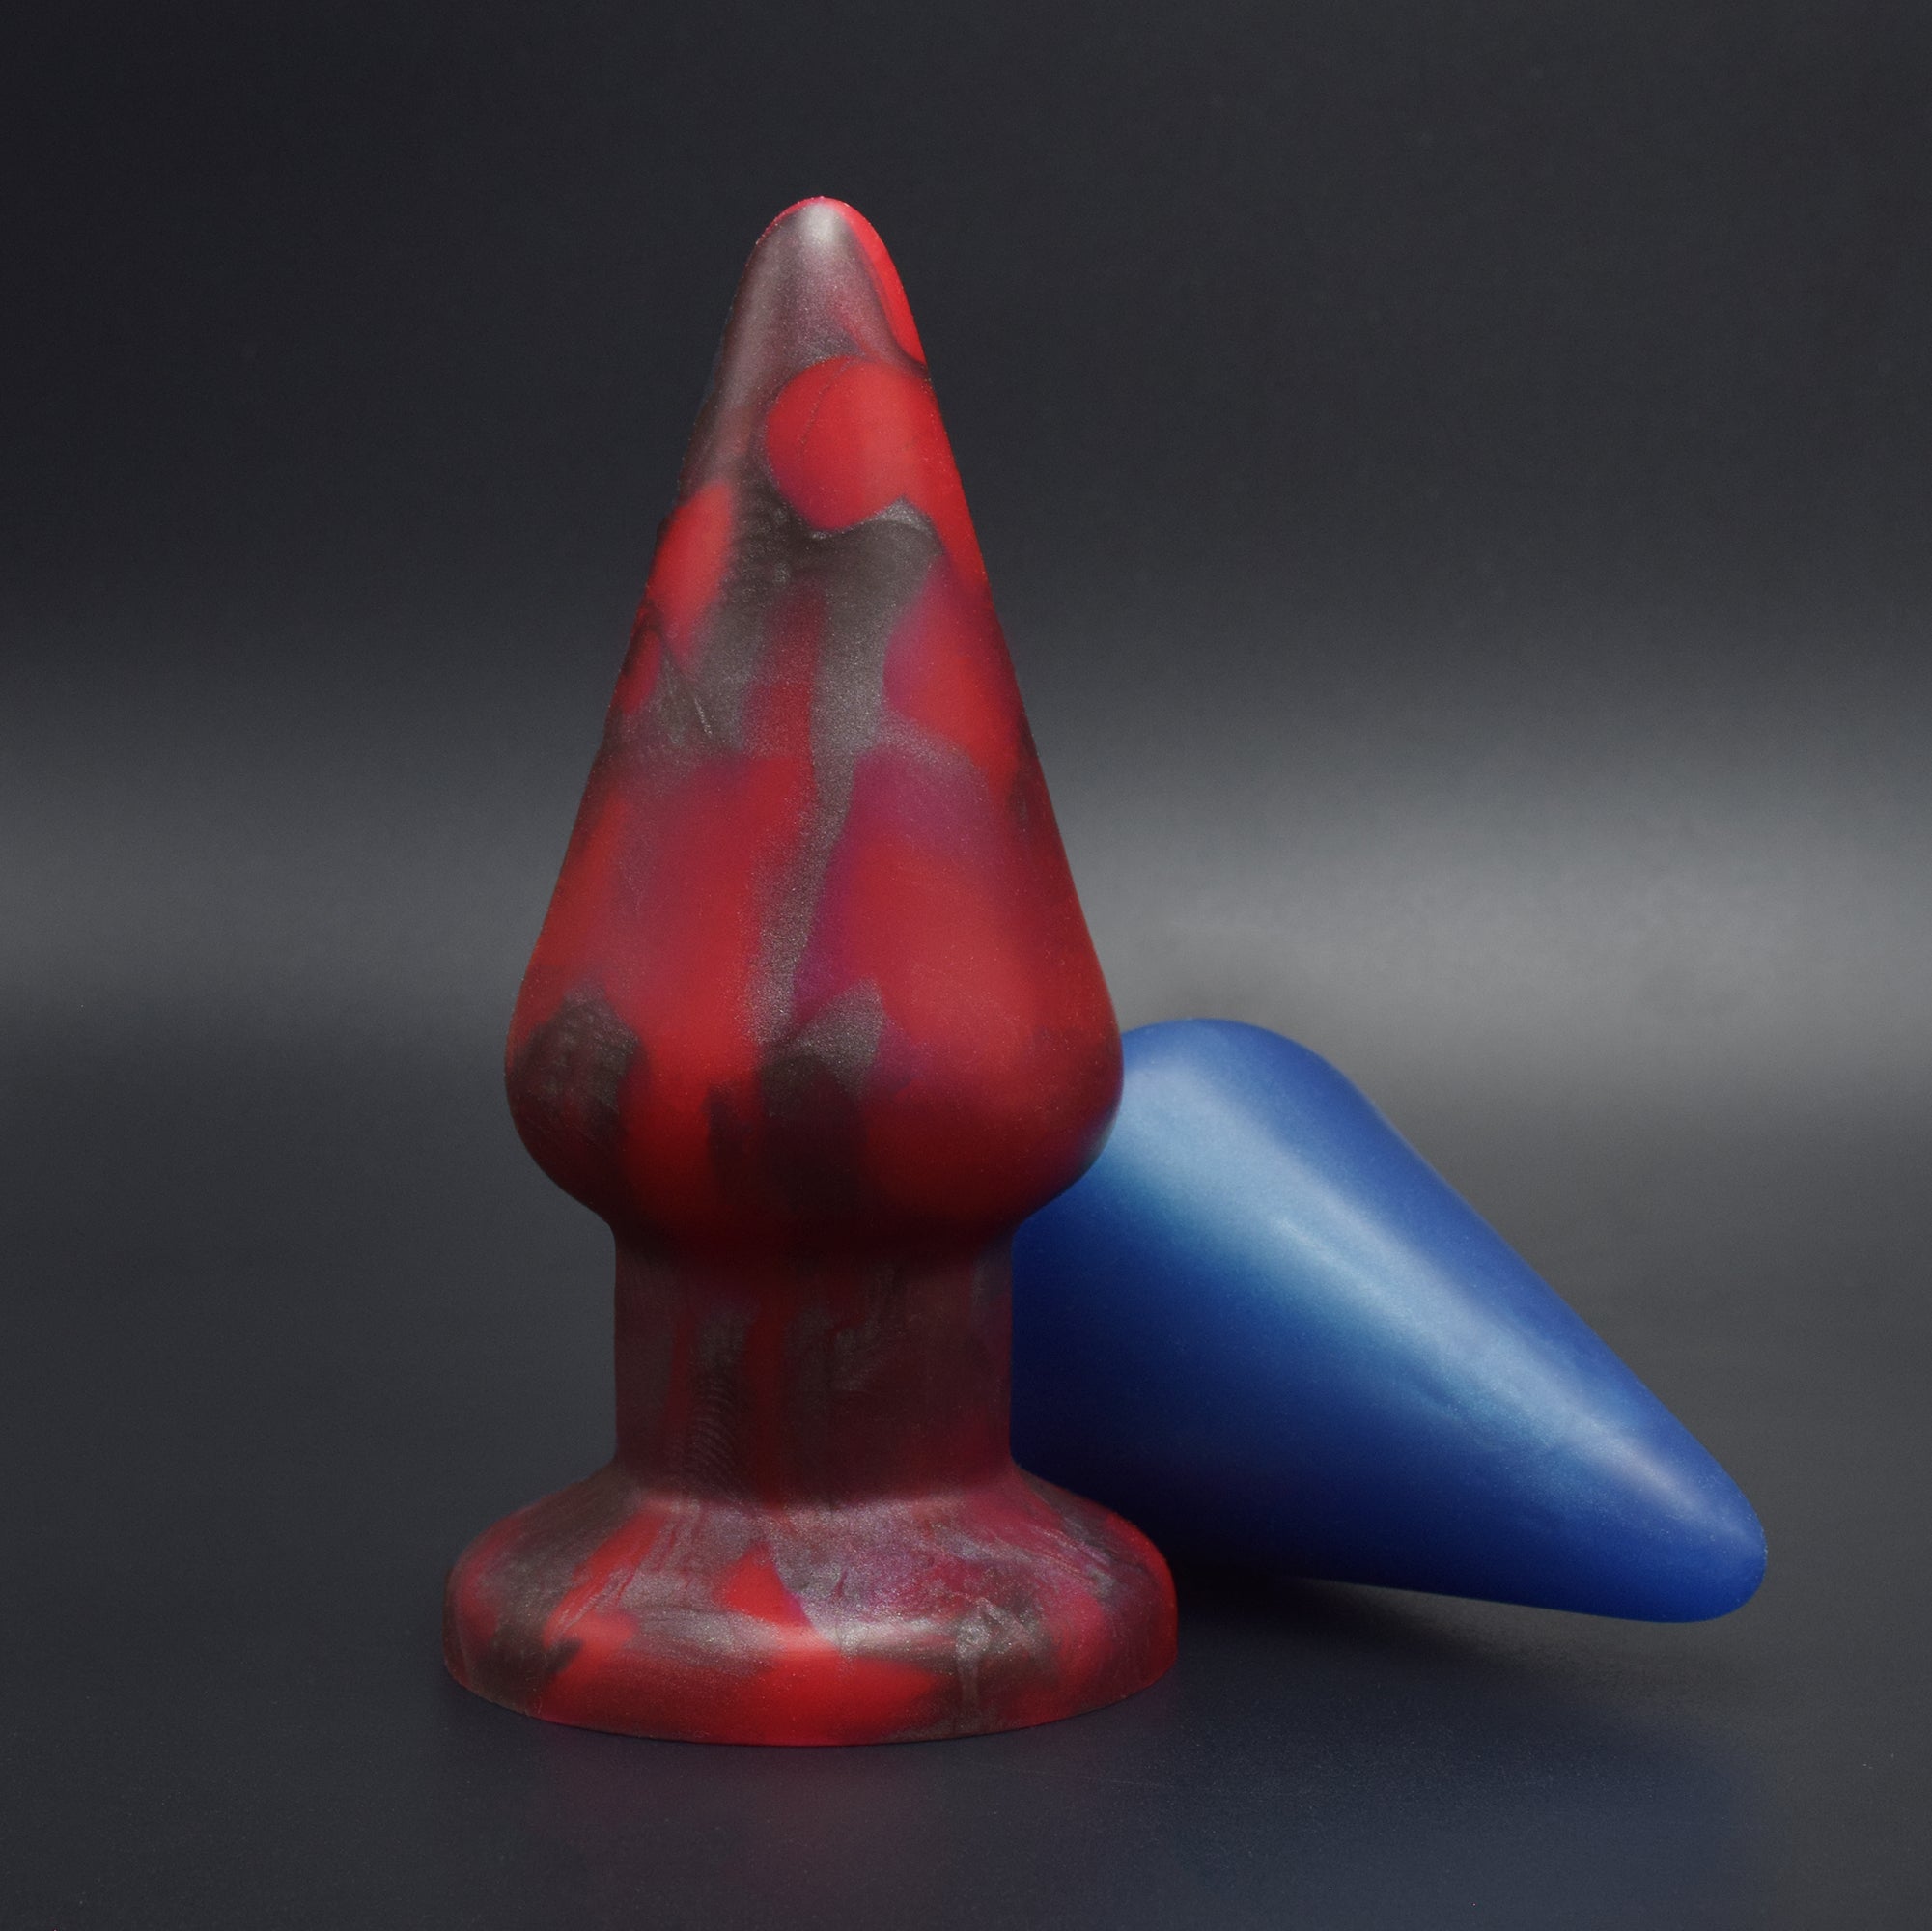 Grip 80 in Forge Red standing, and Grip 80 in Blue Steel laying on its side